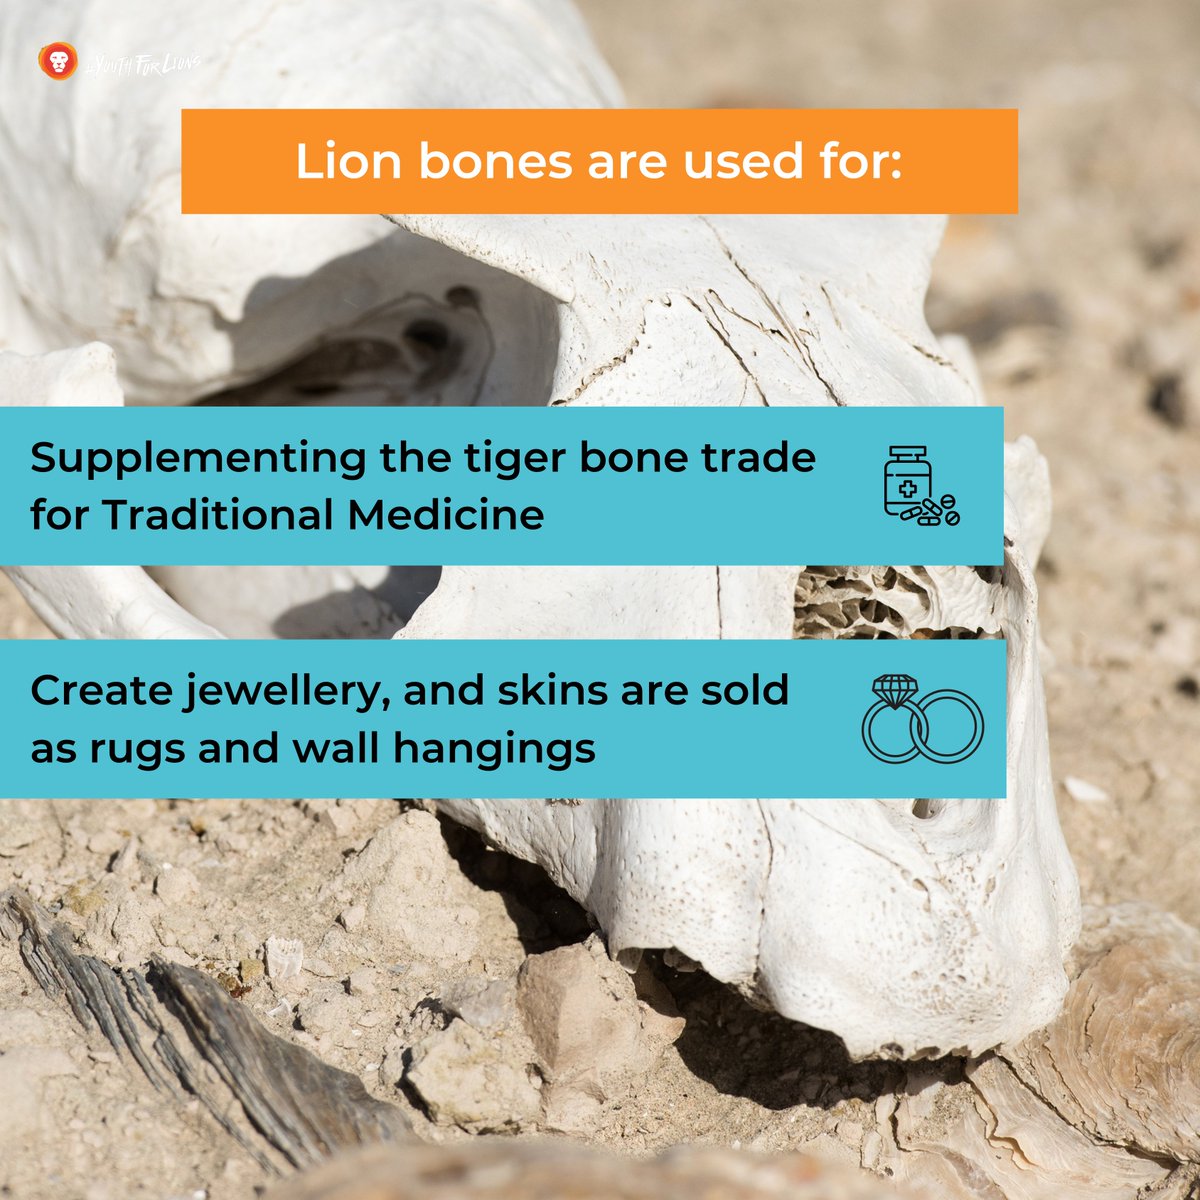 Lion bones are used to: - Supplement the tiger bone trade for Traditional Medicine (There is no credible scientific evidence that tiger or lion bone is effective in healthcare remedies) - Create jewellery, and skins are sold as rugs and wall hangings bloodlions.org/about-the-brut…